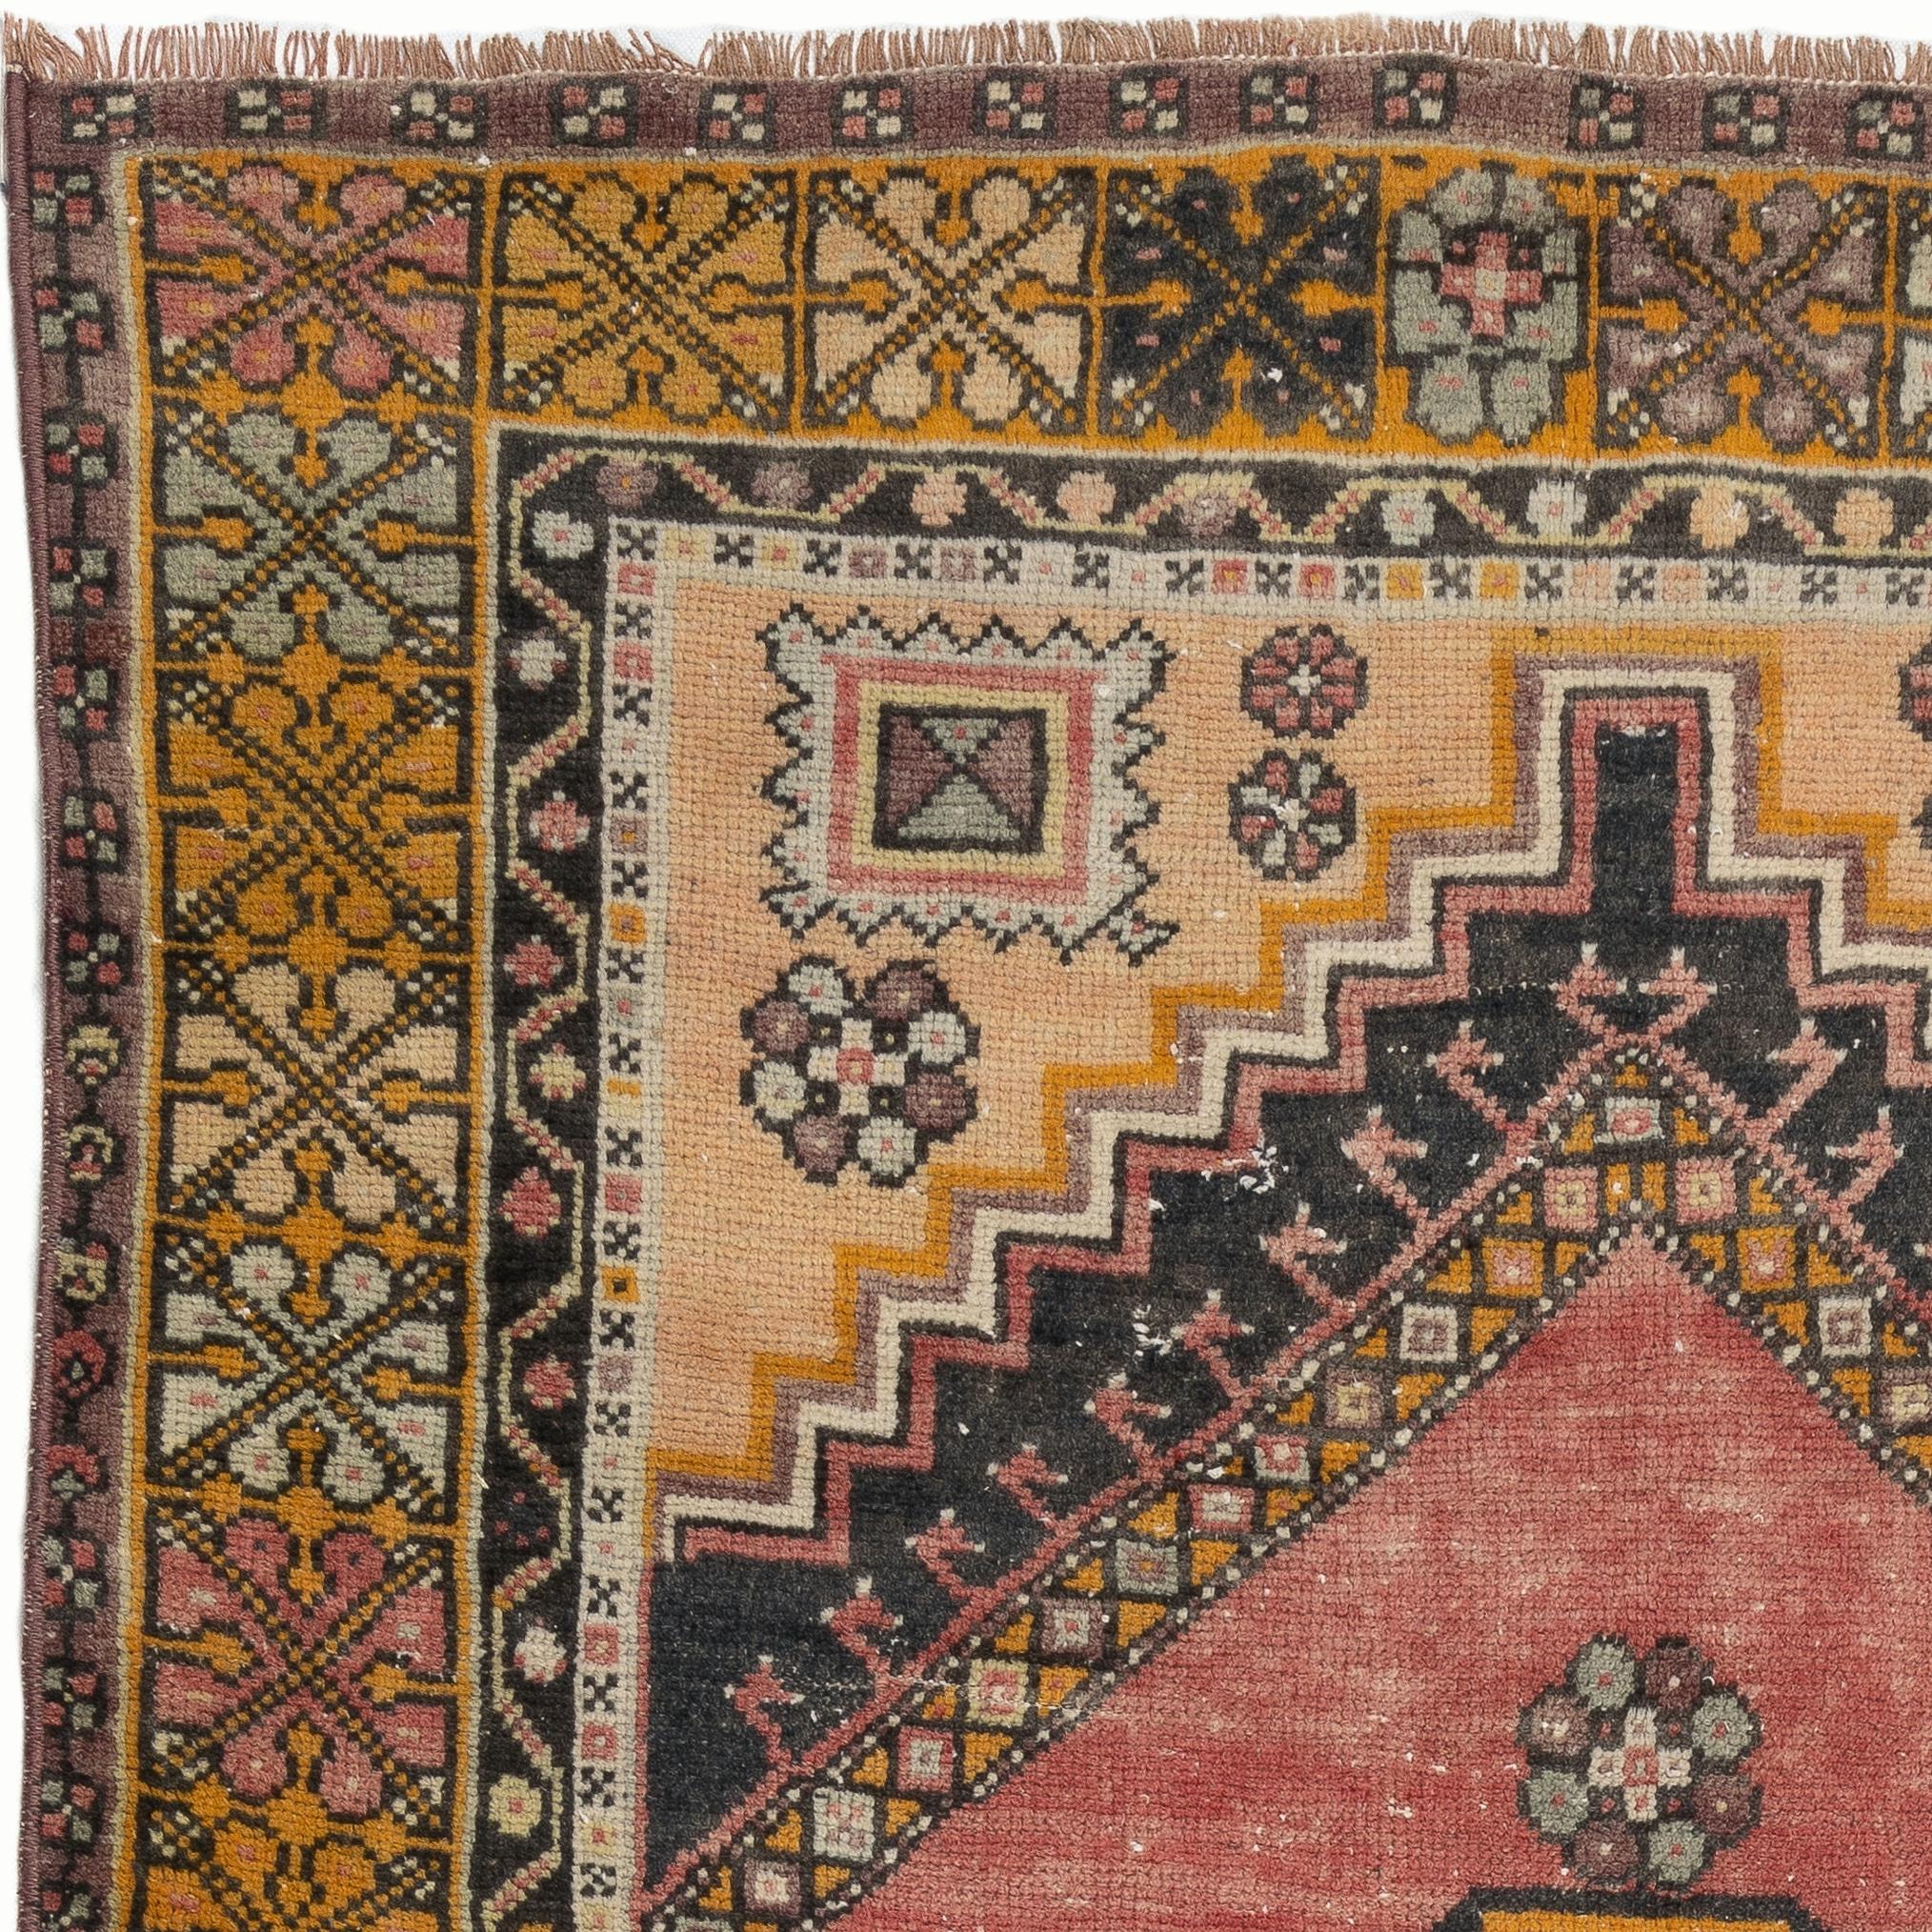 A vintage hand-knotted Turkish village rug with medium wool pile on wool foundation. It features a geometrical medallion at its center and large corner pieces filled with tribal motifs as well as a border decorated with angular star motifs. The rug